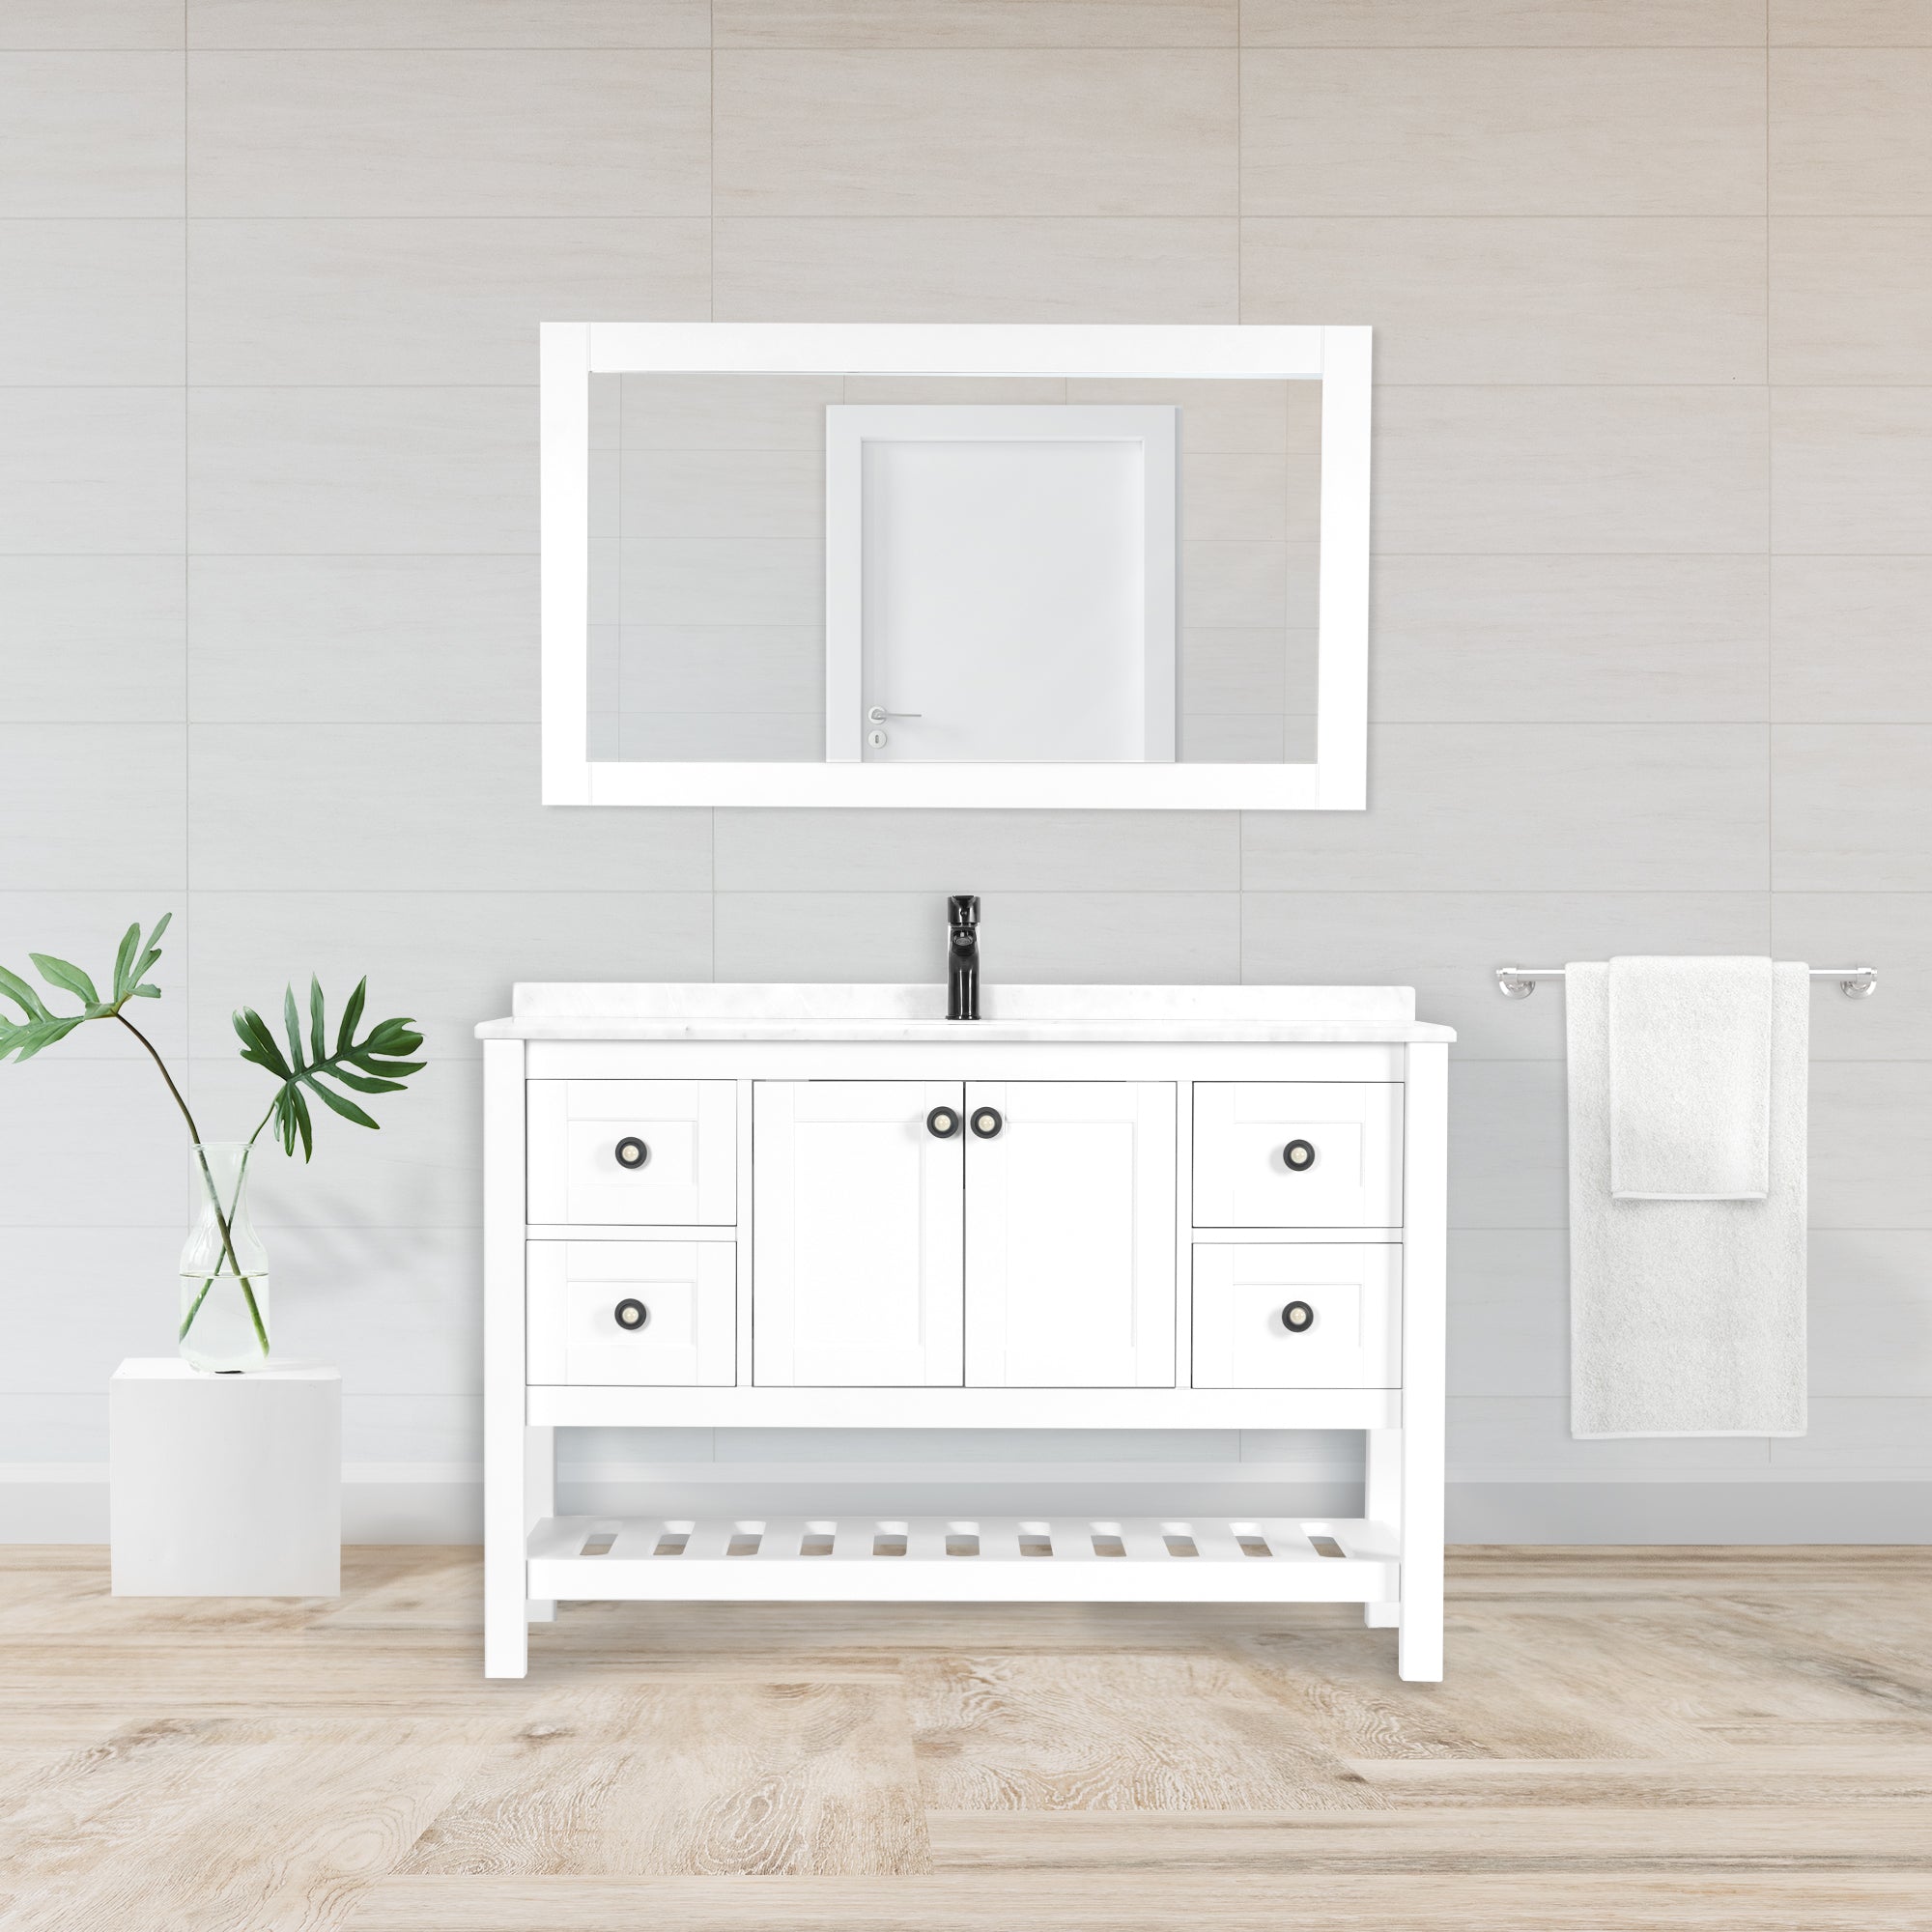 LUCCA 48 INCH FREE STANDING VANITY AND SINK COMBO WITH MATCHING MIRROR - WHITE